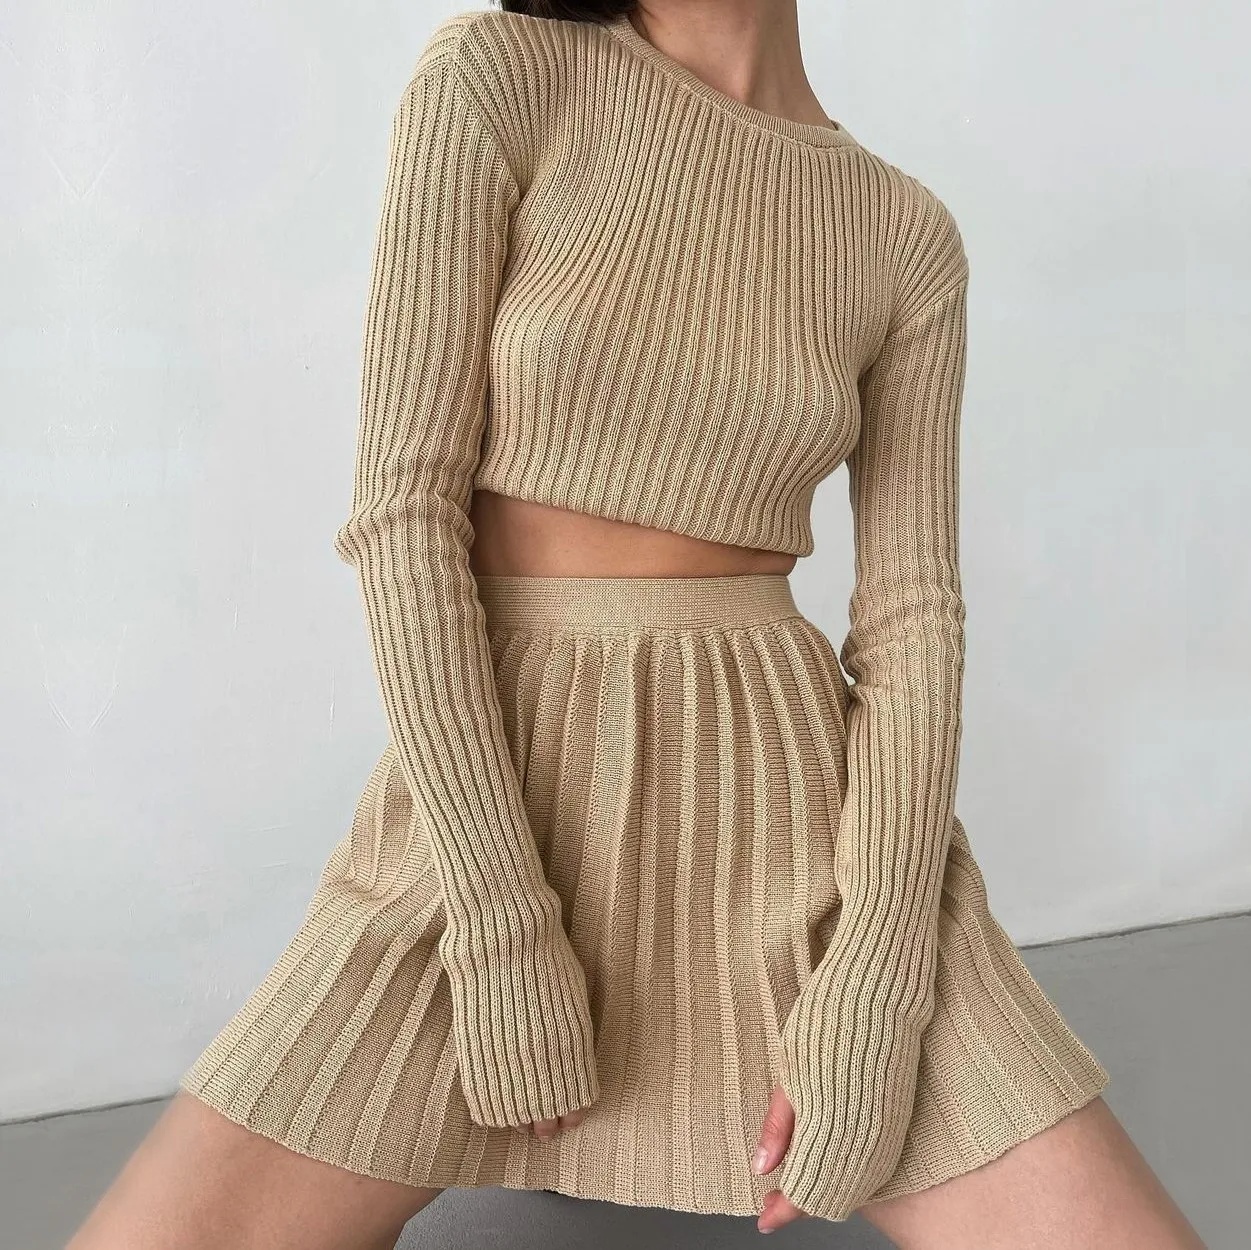 

2022 spring fashion appeal co ords women knitted 2 piece set long sleeve pleated knit co ord set 2 piece sweater skirt set